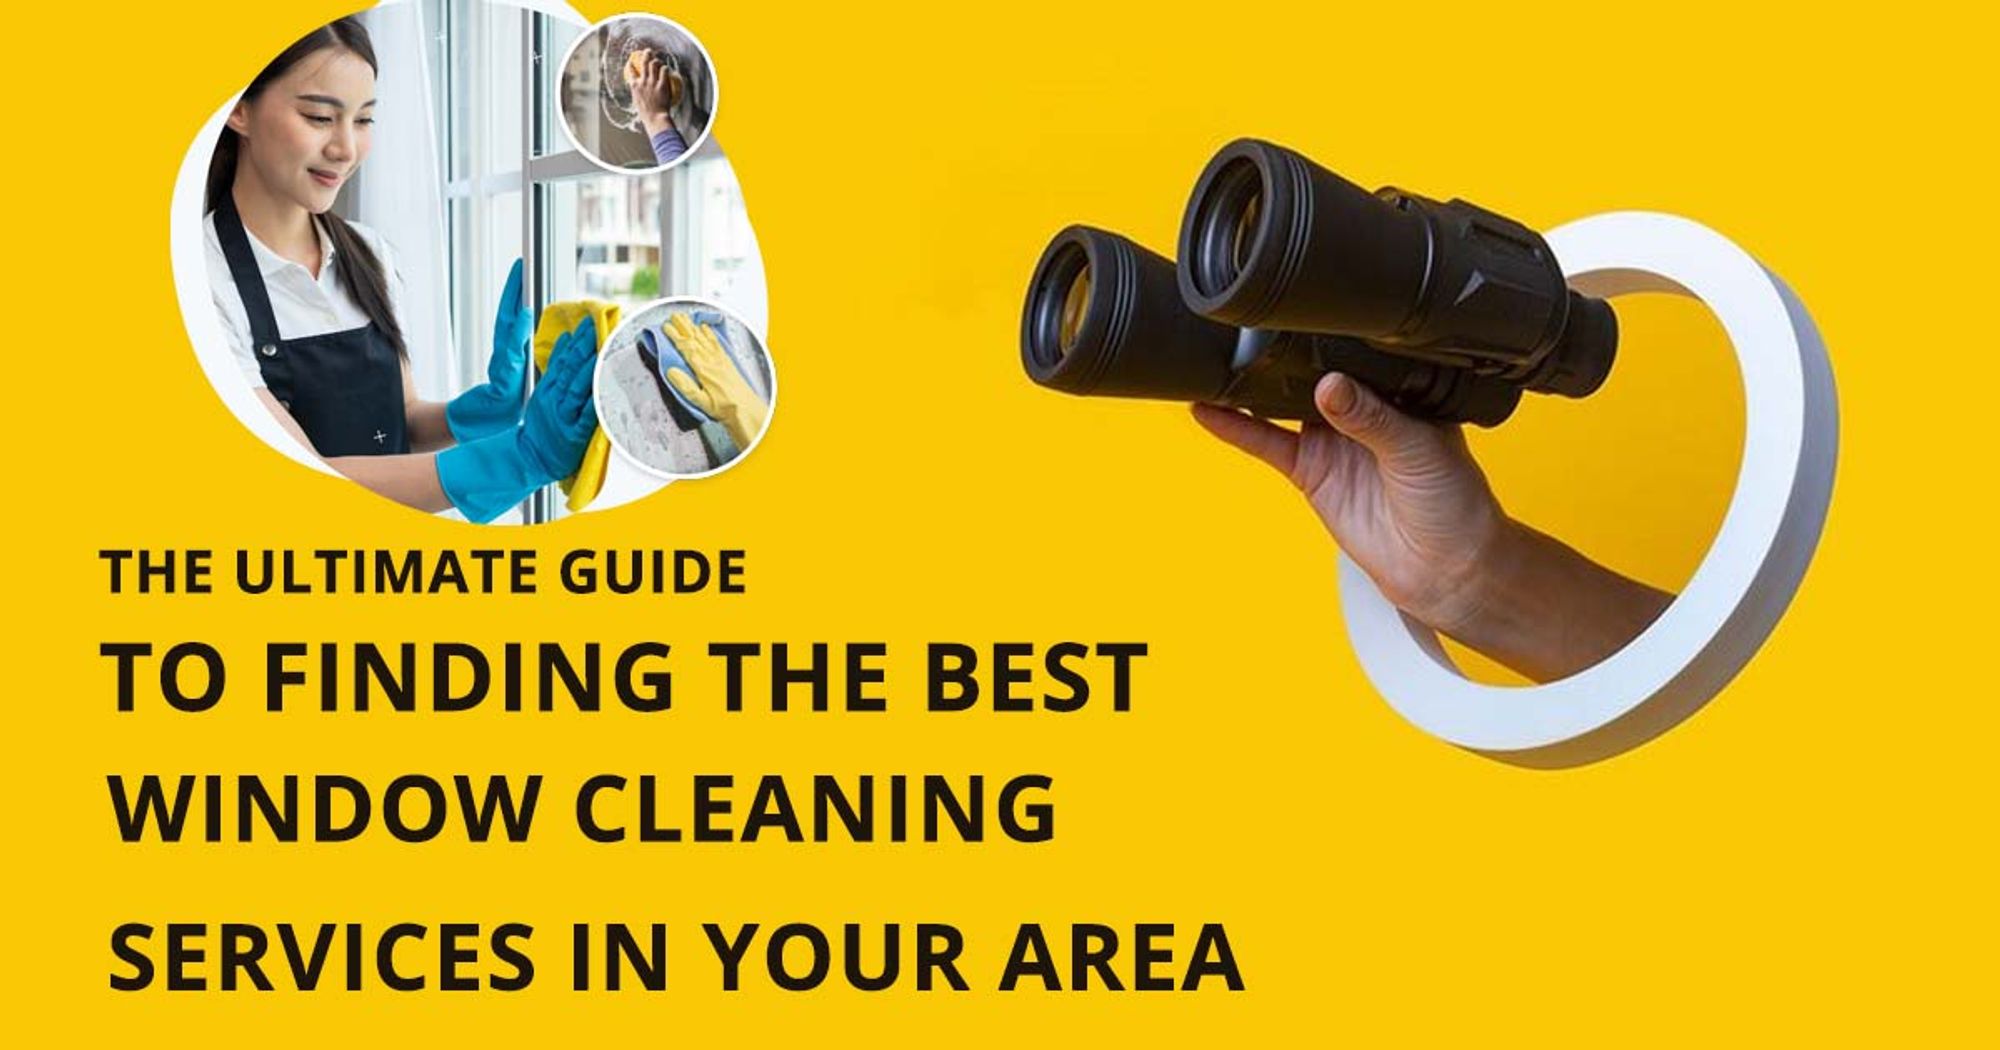 The Ultimate Guide To Finding The Best Window Cleaning Services In Your Area